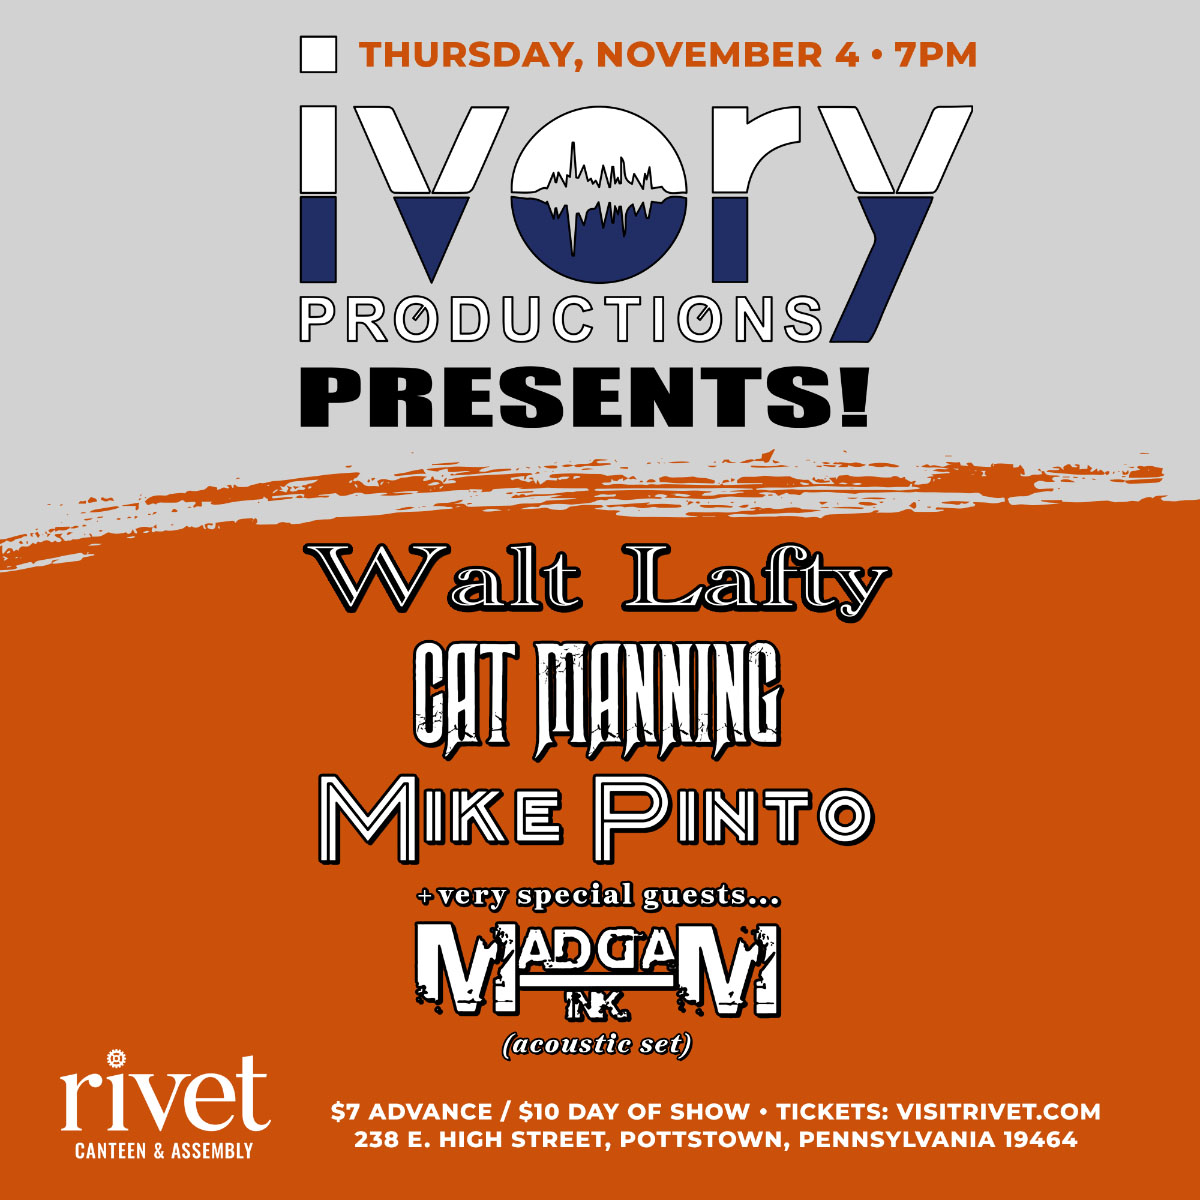 Event flyer for Ivory Productions: Walt Lafty, MaddaM Ink acoustic, Cat Manning and Mike Pinto at Rivet!